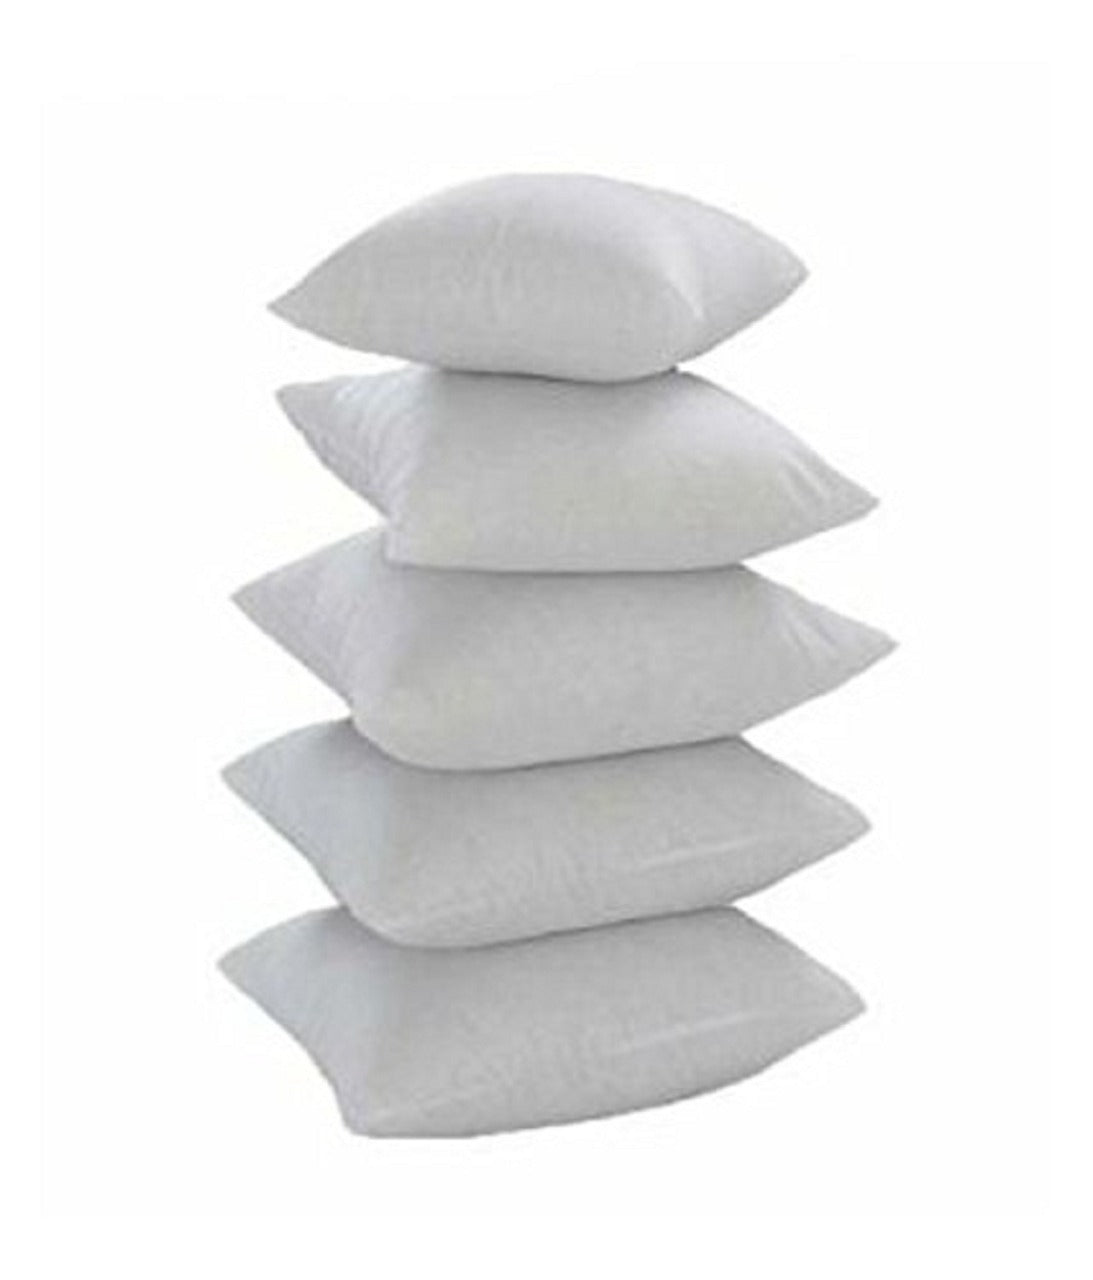 JDX Microfiber Square Soft Cushion Filler for Bed, Sofa, White, 5 Pieces - JDX STORE